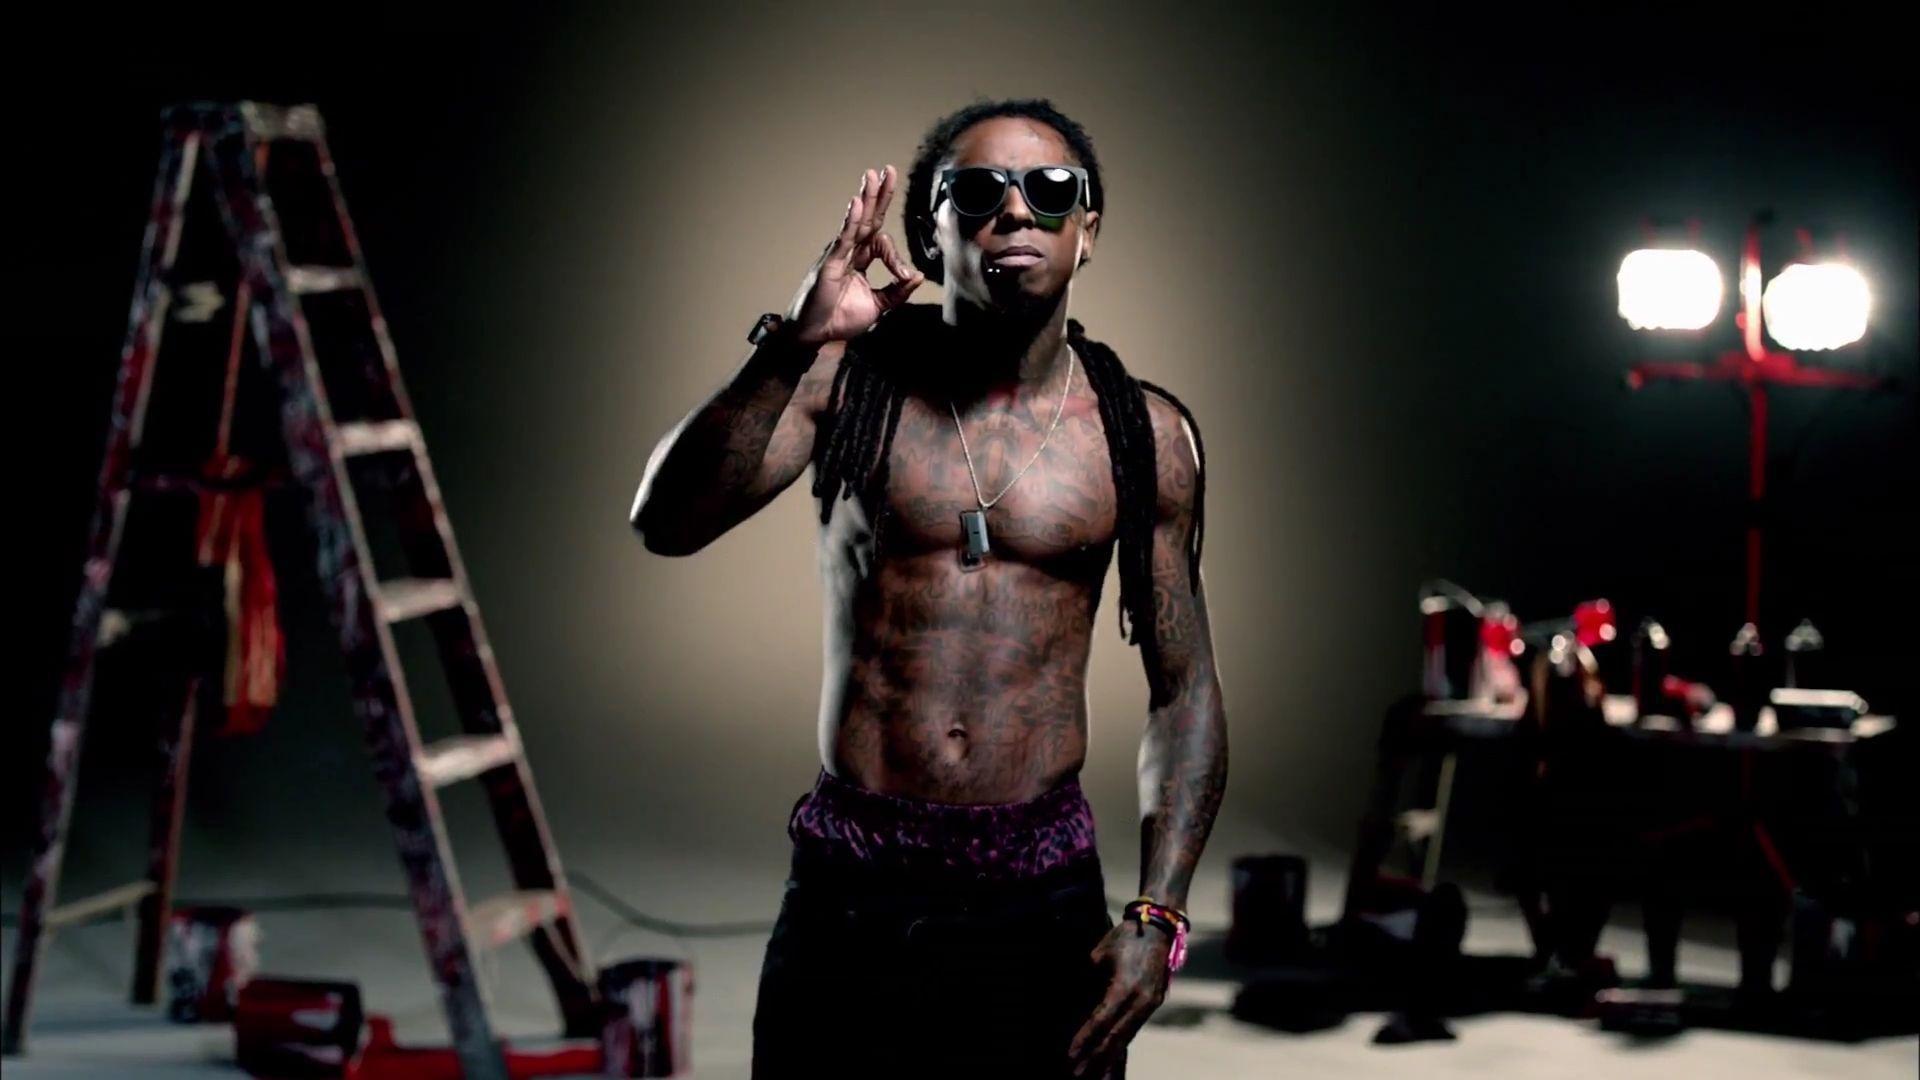 Lil Wayne HD picture. High Definition Wallpaper, High Definition